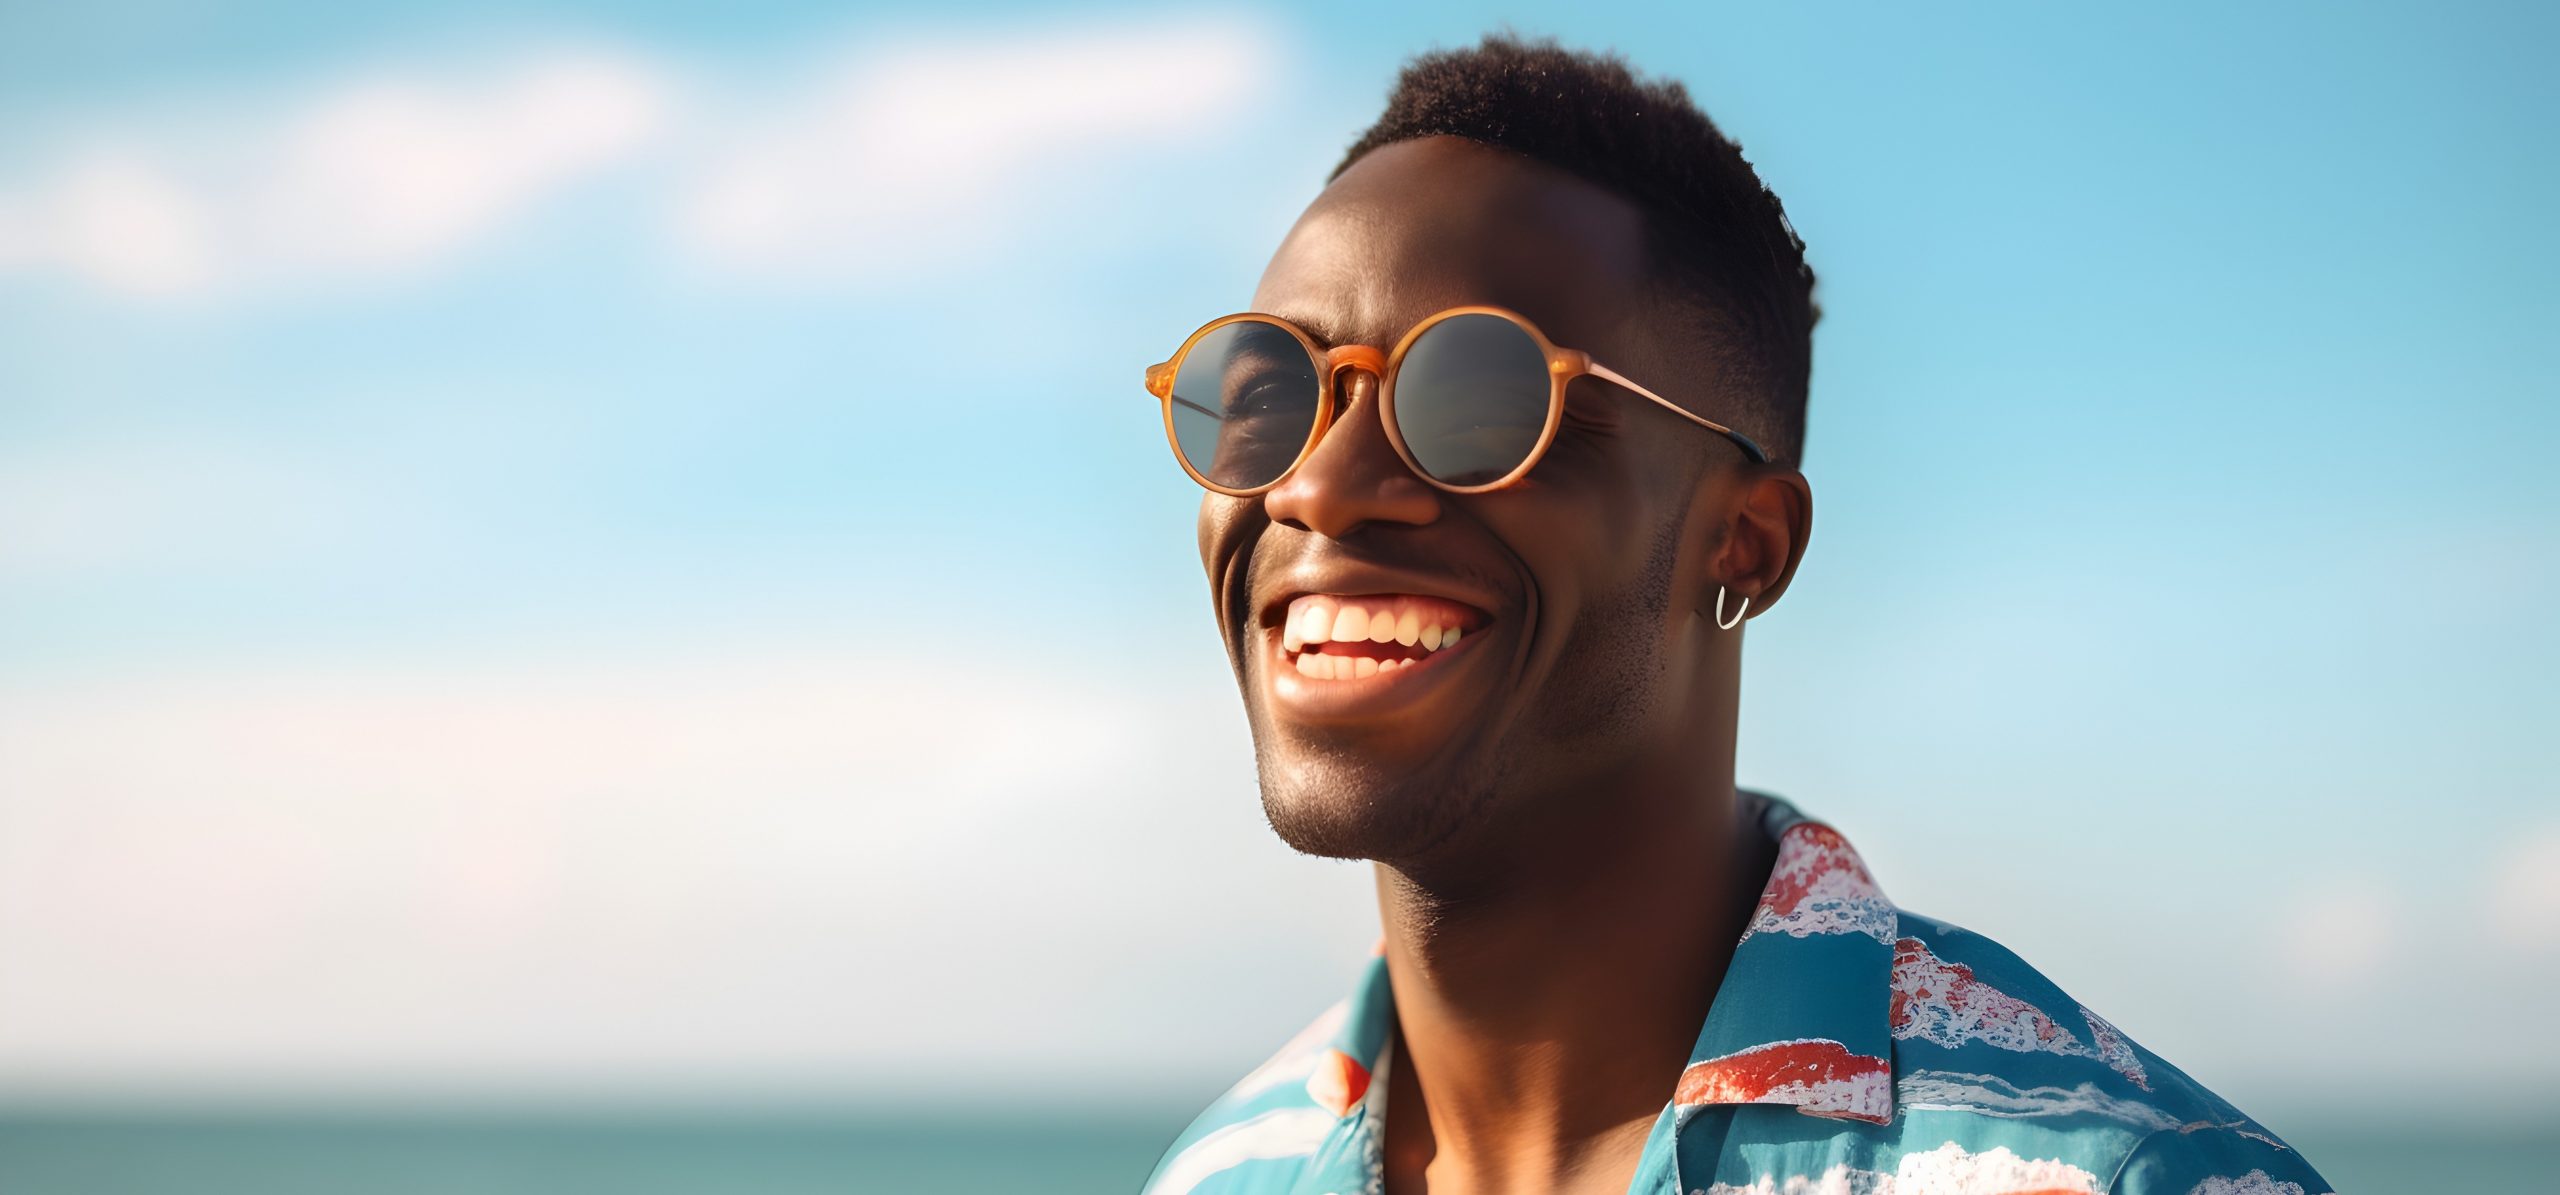 Man on beach with sunglasses laughing scaled